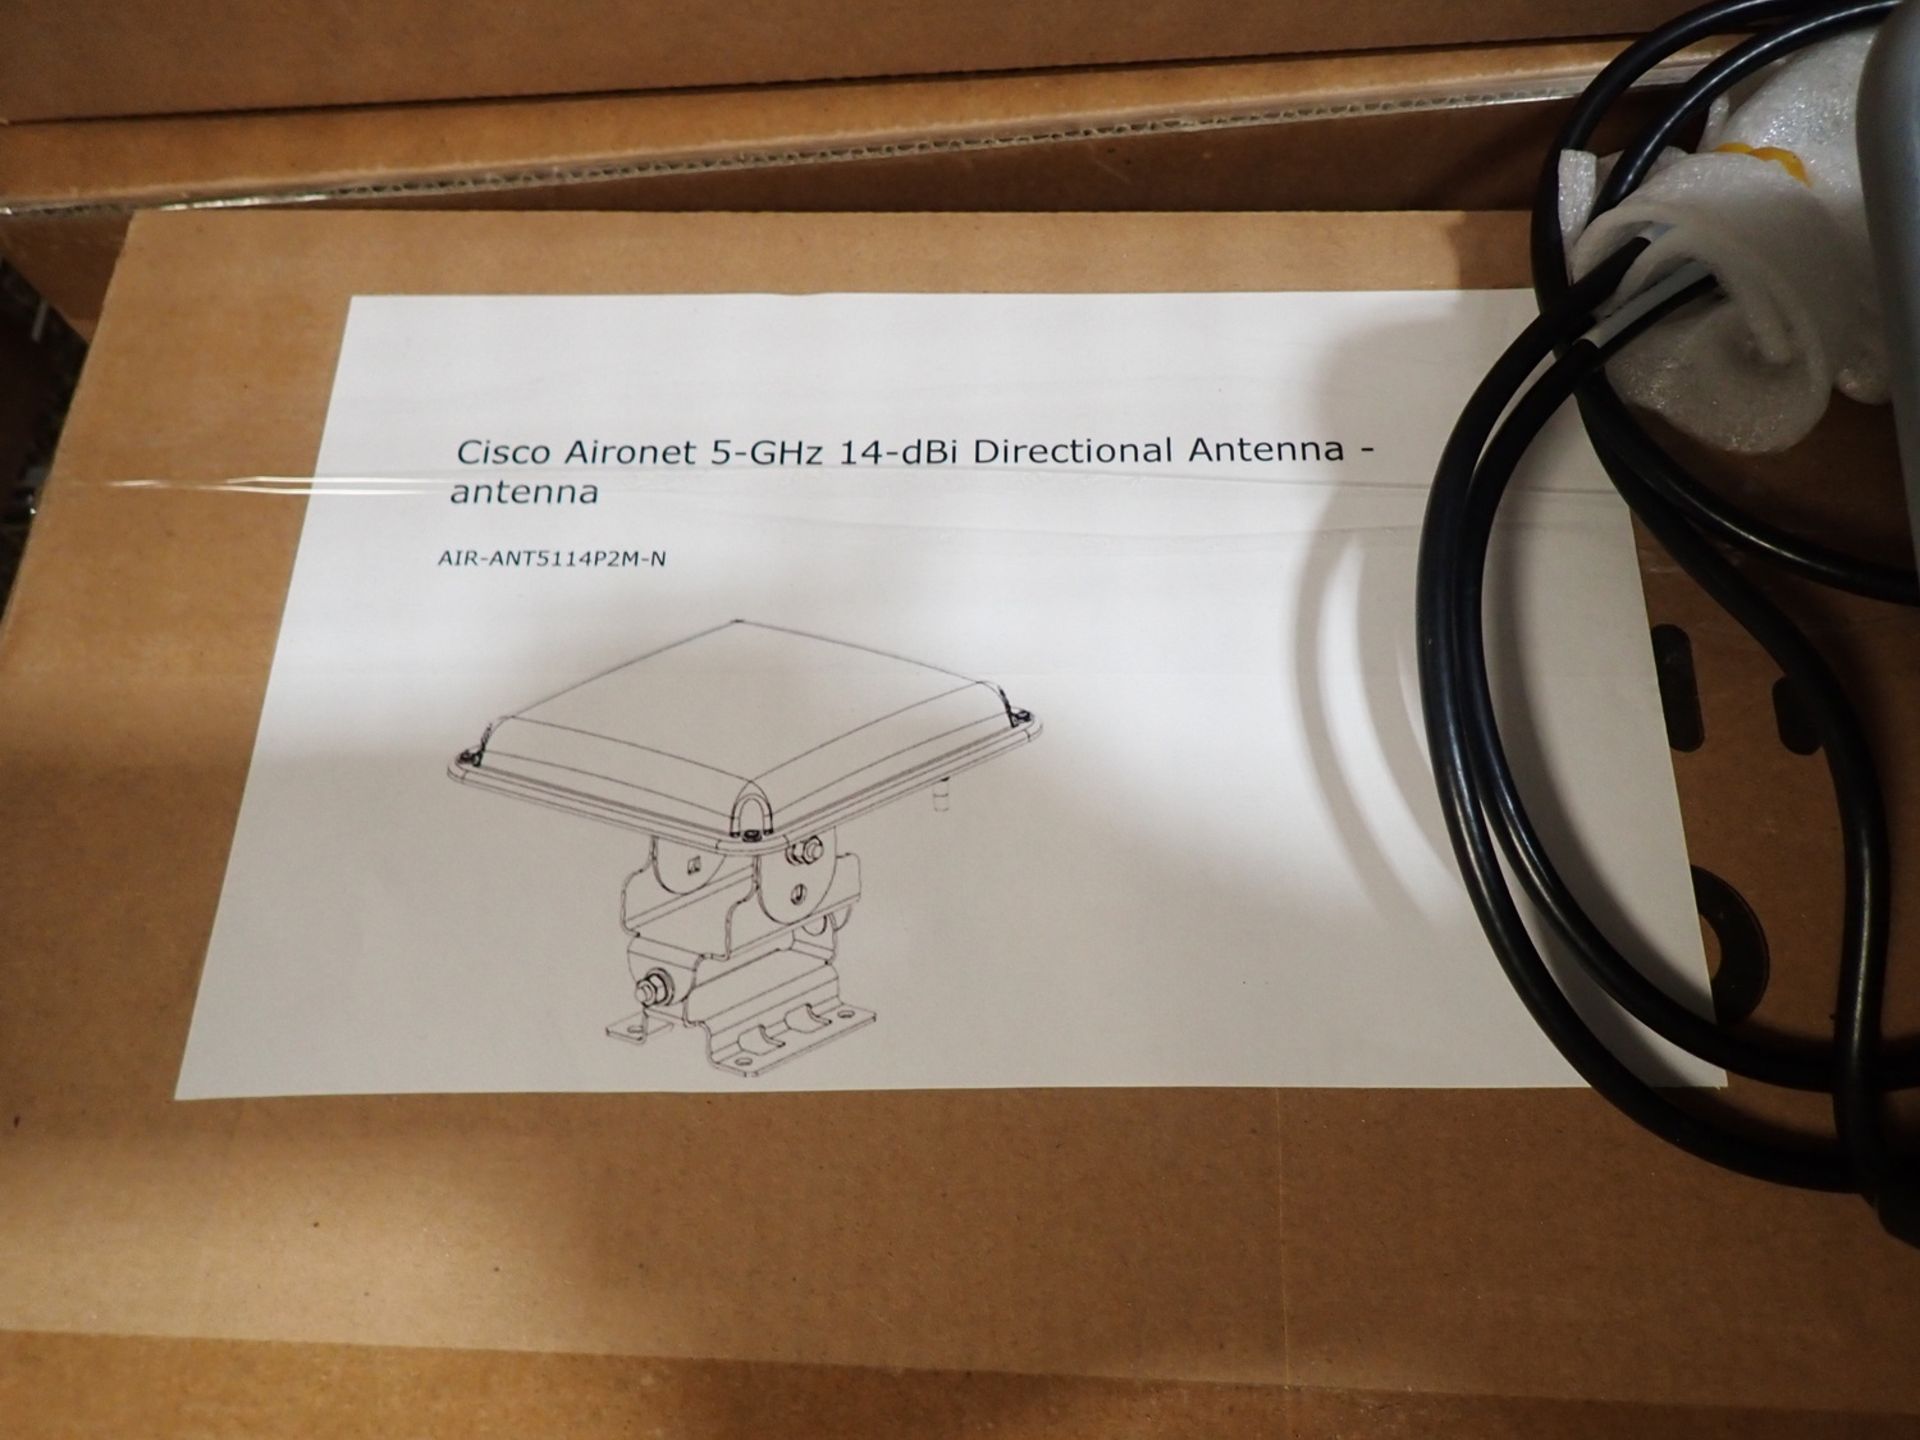 LOT - CISCO (3) AIRONET 5GHZ 14-DBI, (4) AIR-ANT 5114P2N-N DIRECTIONAL ANTENNAS - Image 2 of 3